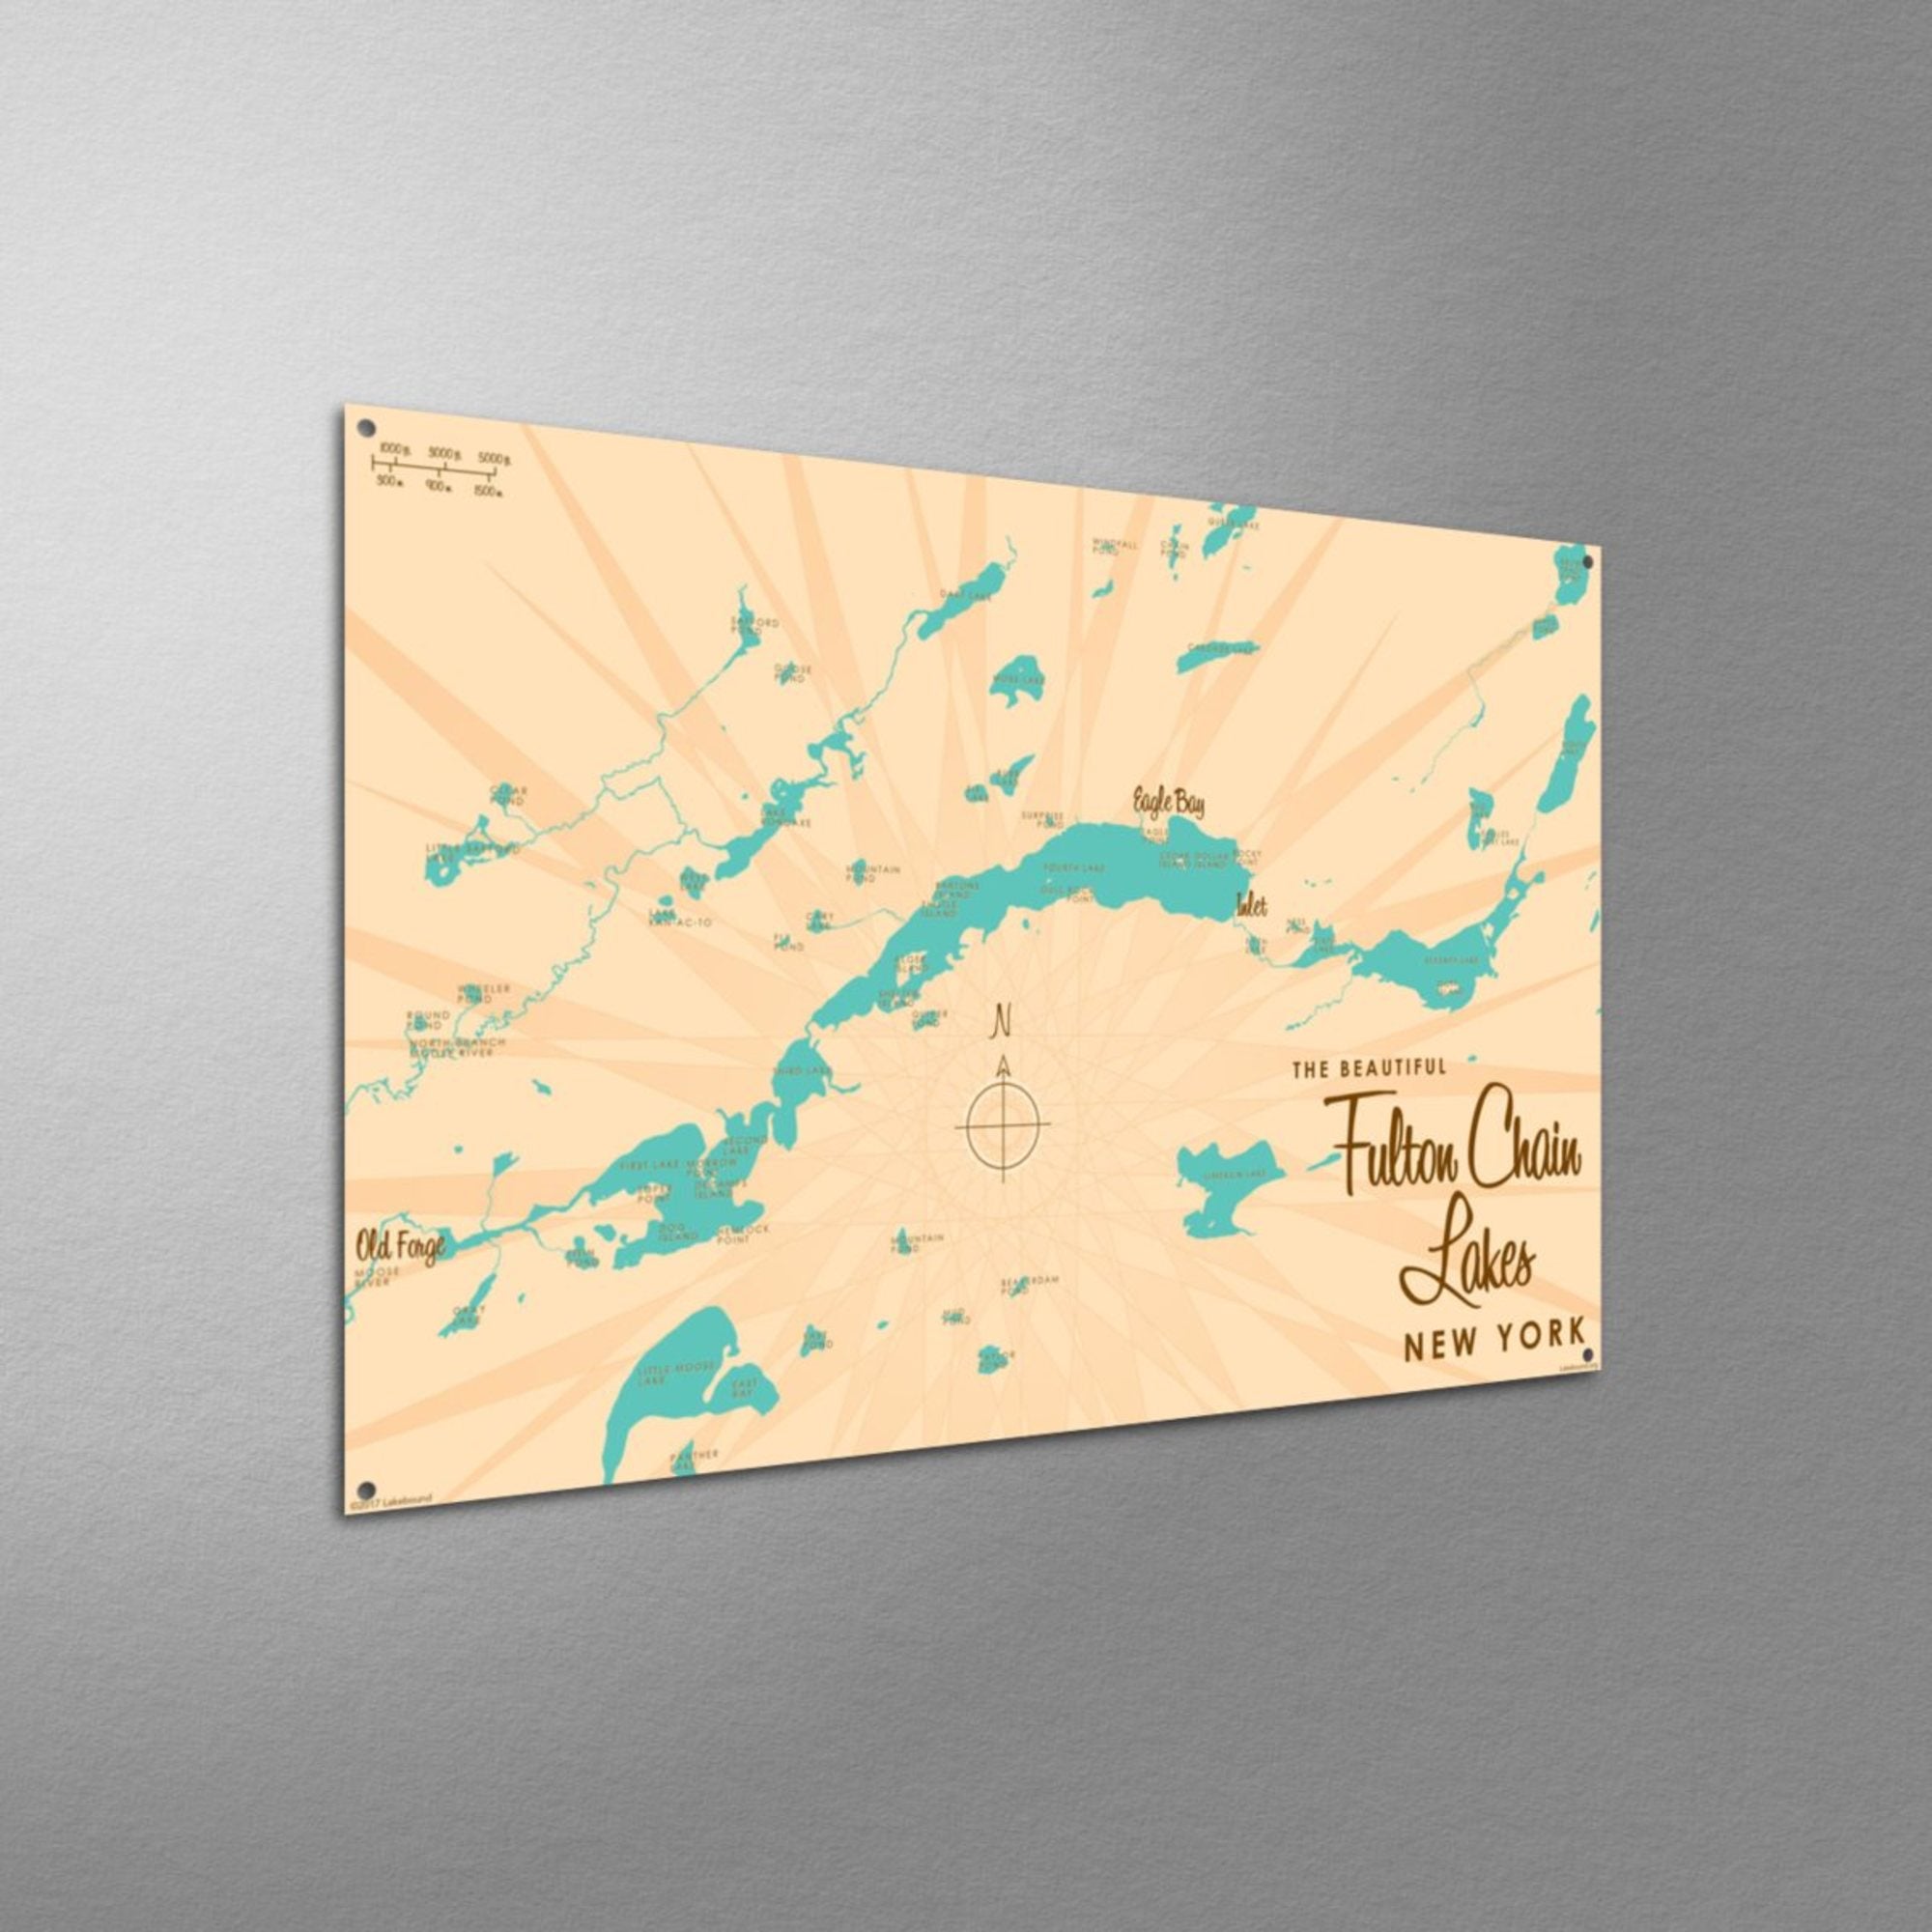 Fulton Chain of Lakes New York, Metal Sign Map Art